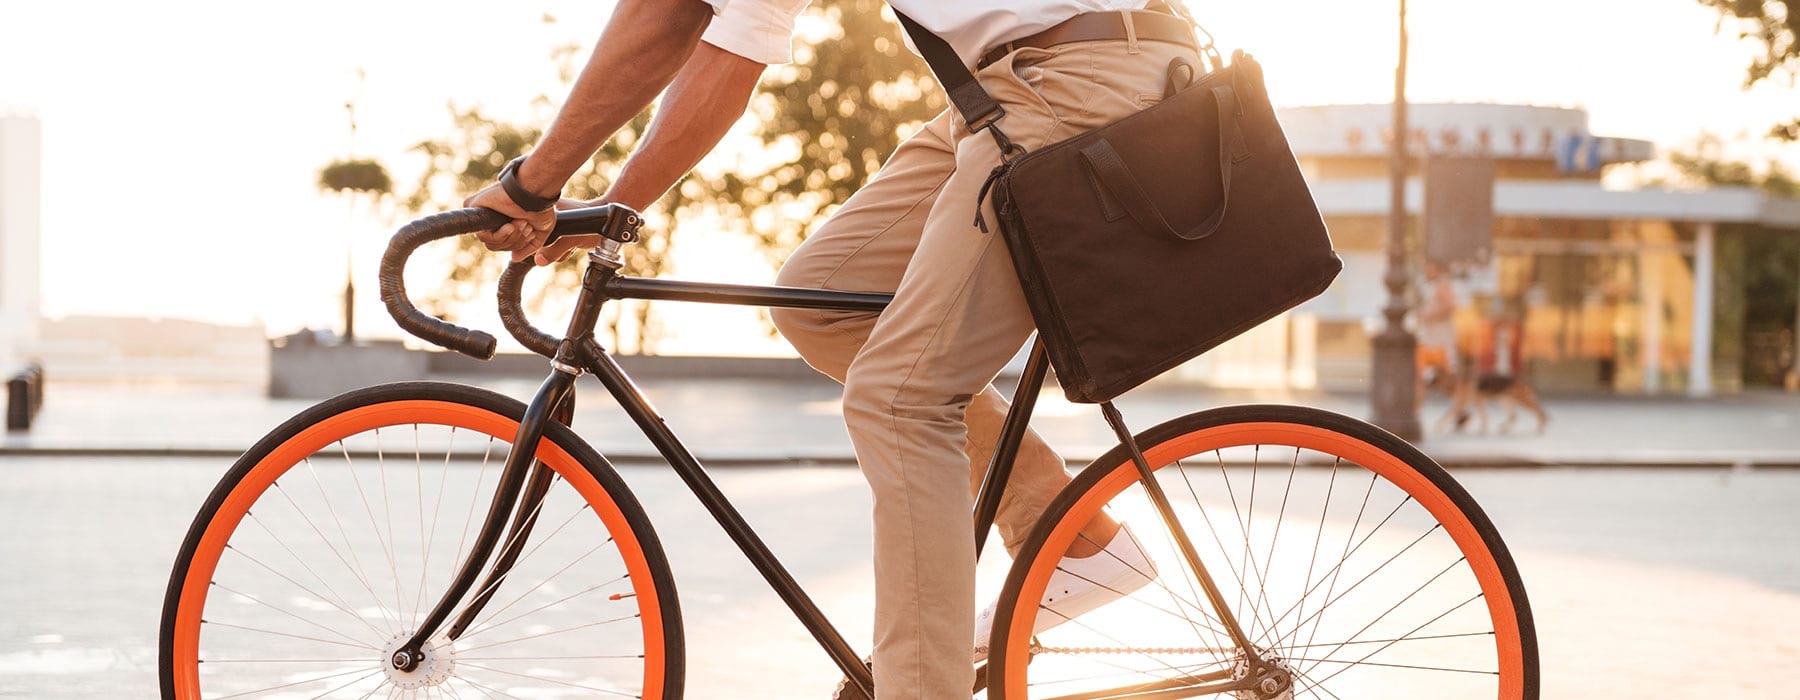 lifestyle image of a person riding their bicycle at a sunset